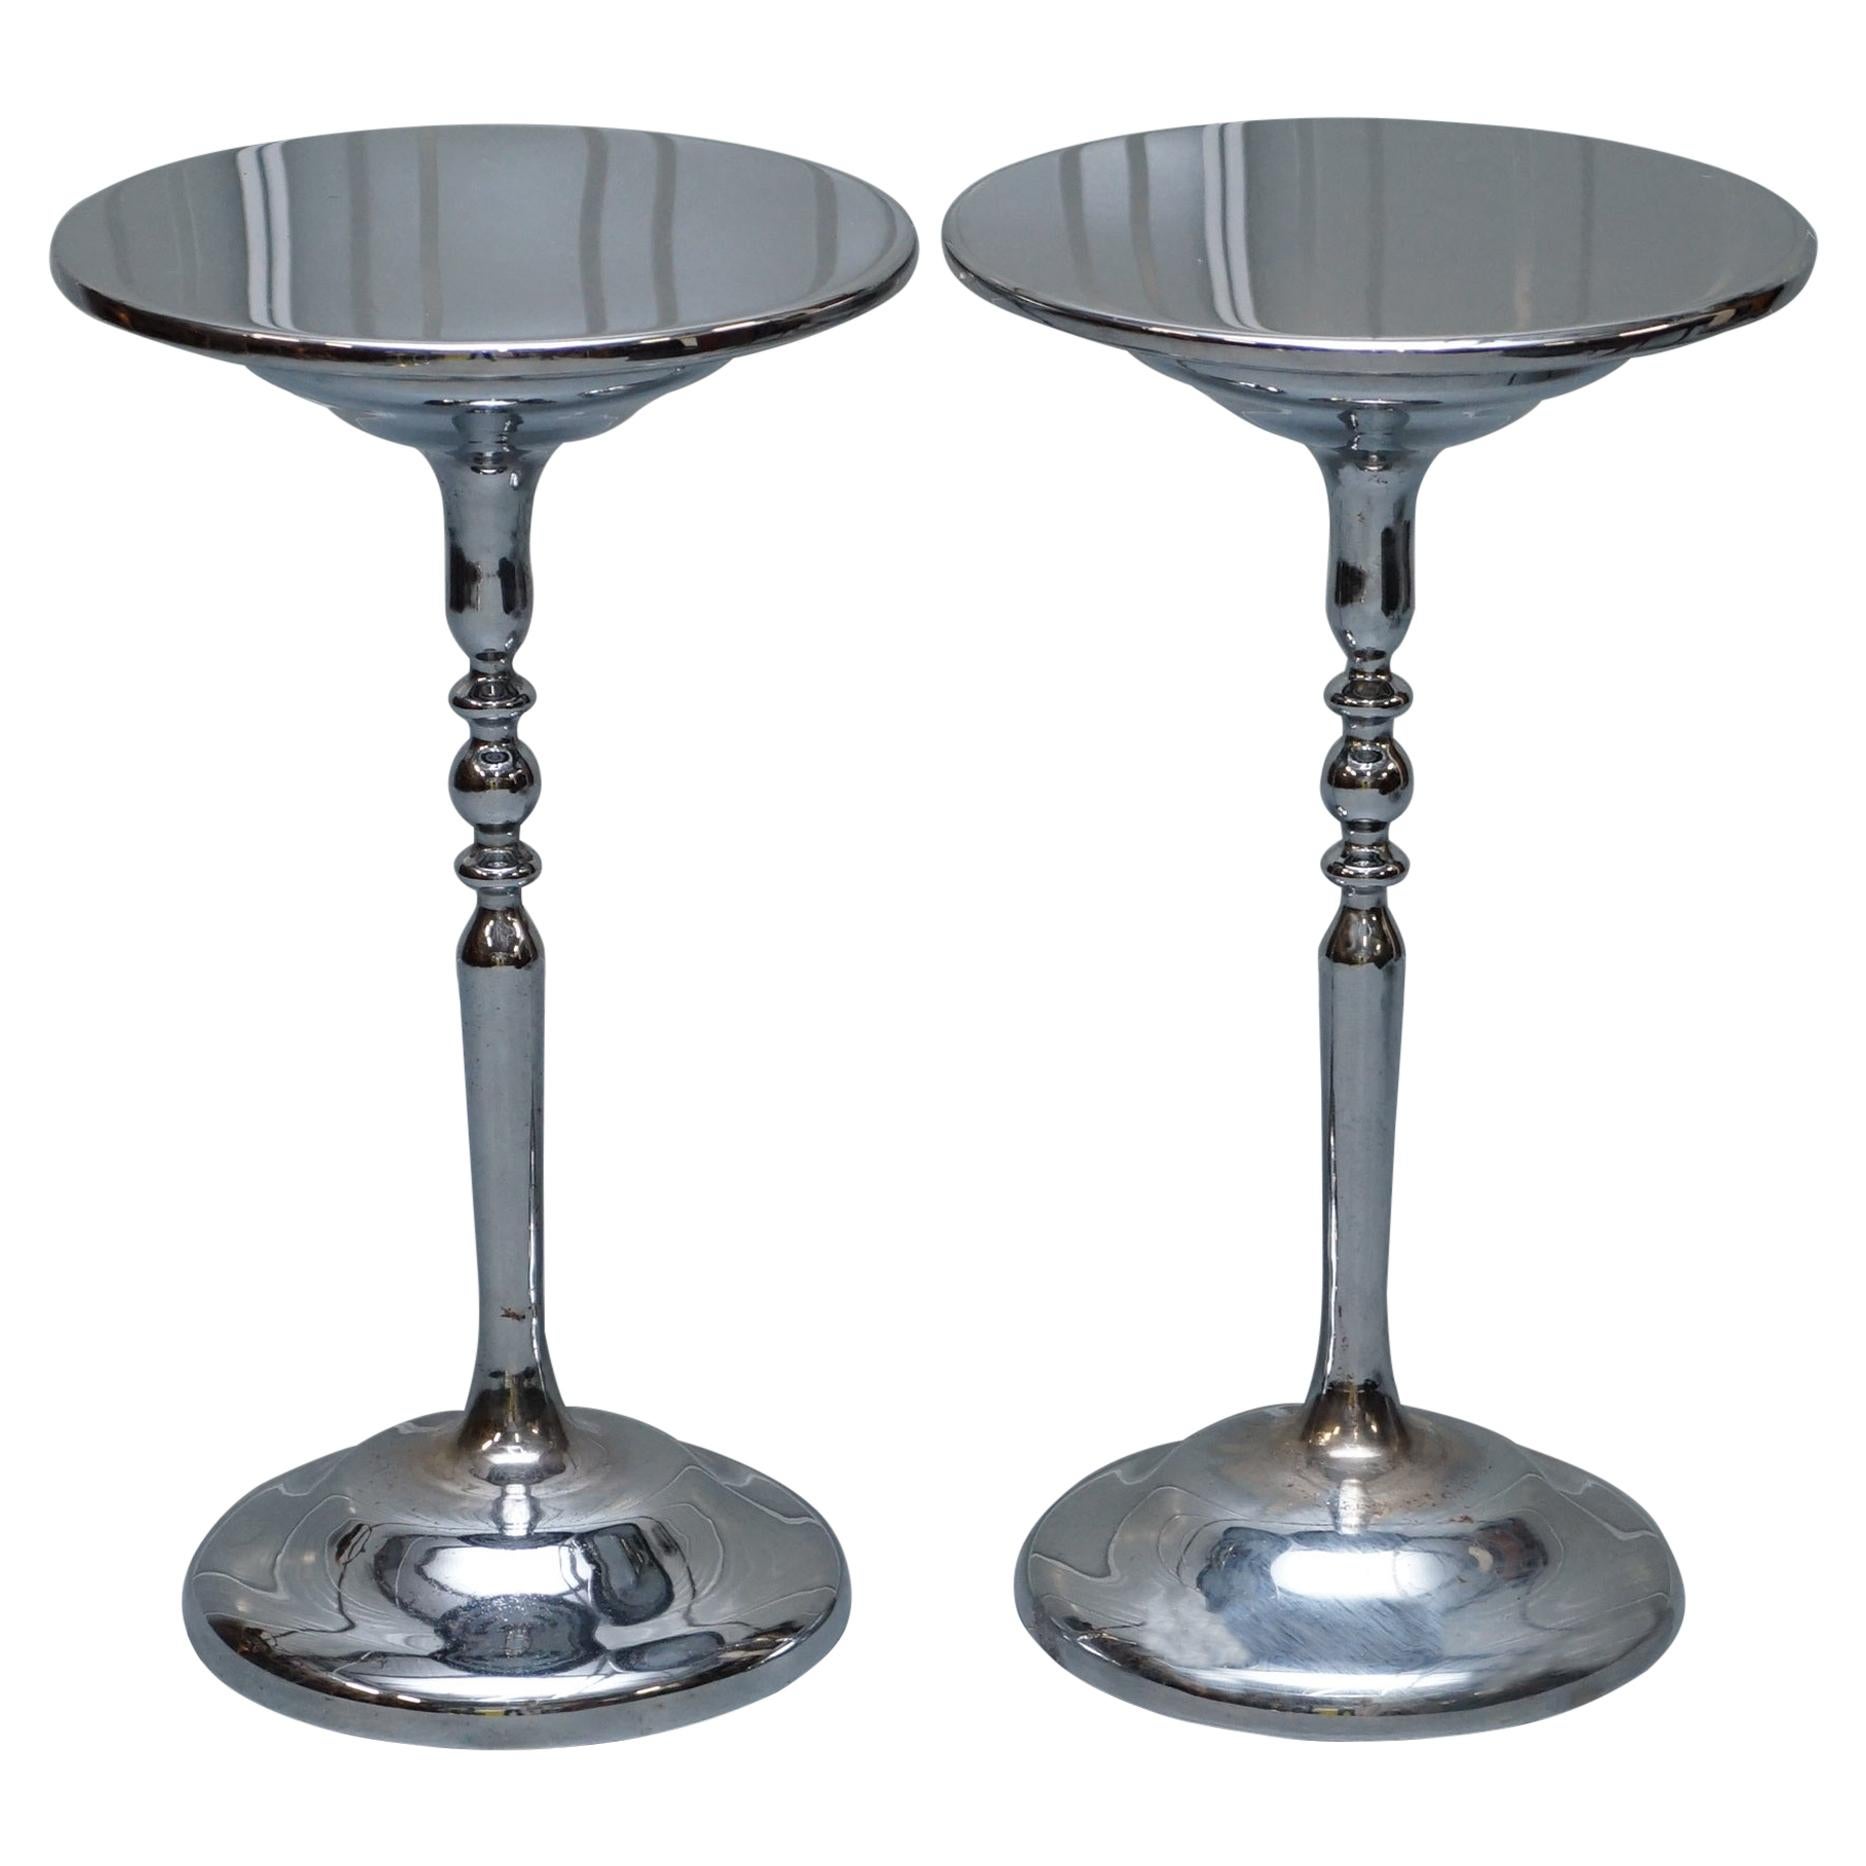 Pair of Chrome-Plated Vintage Side Tables on Solid Oak Bases Part of Large Suite